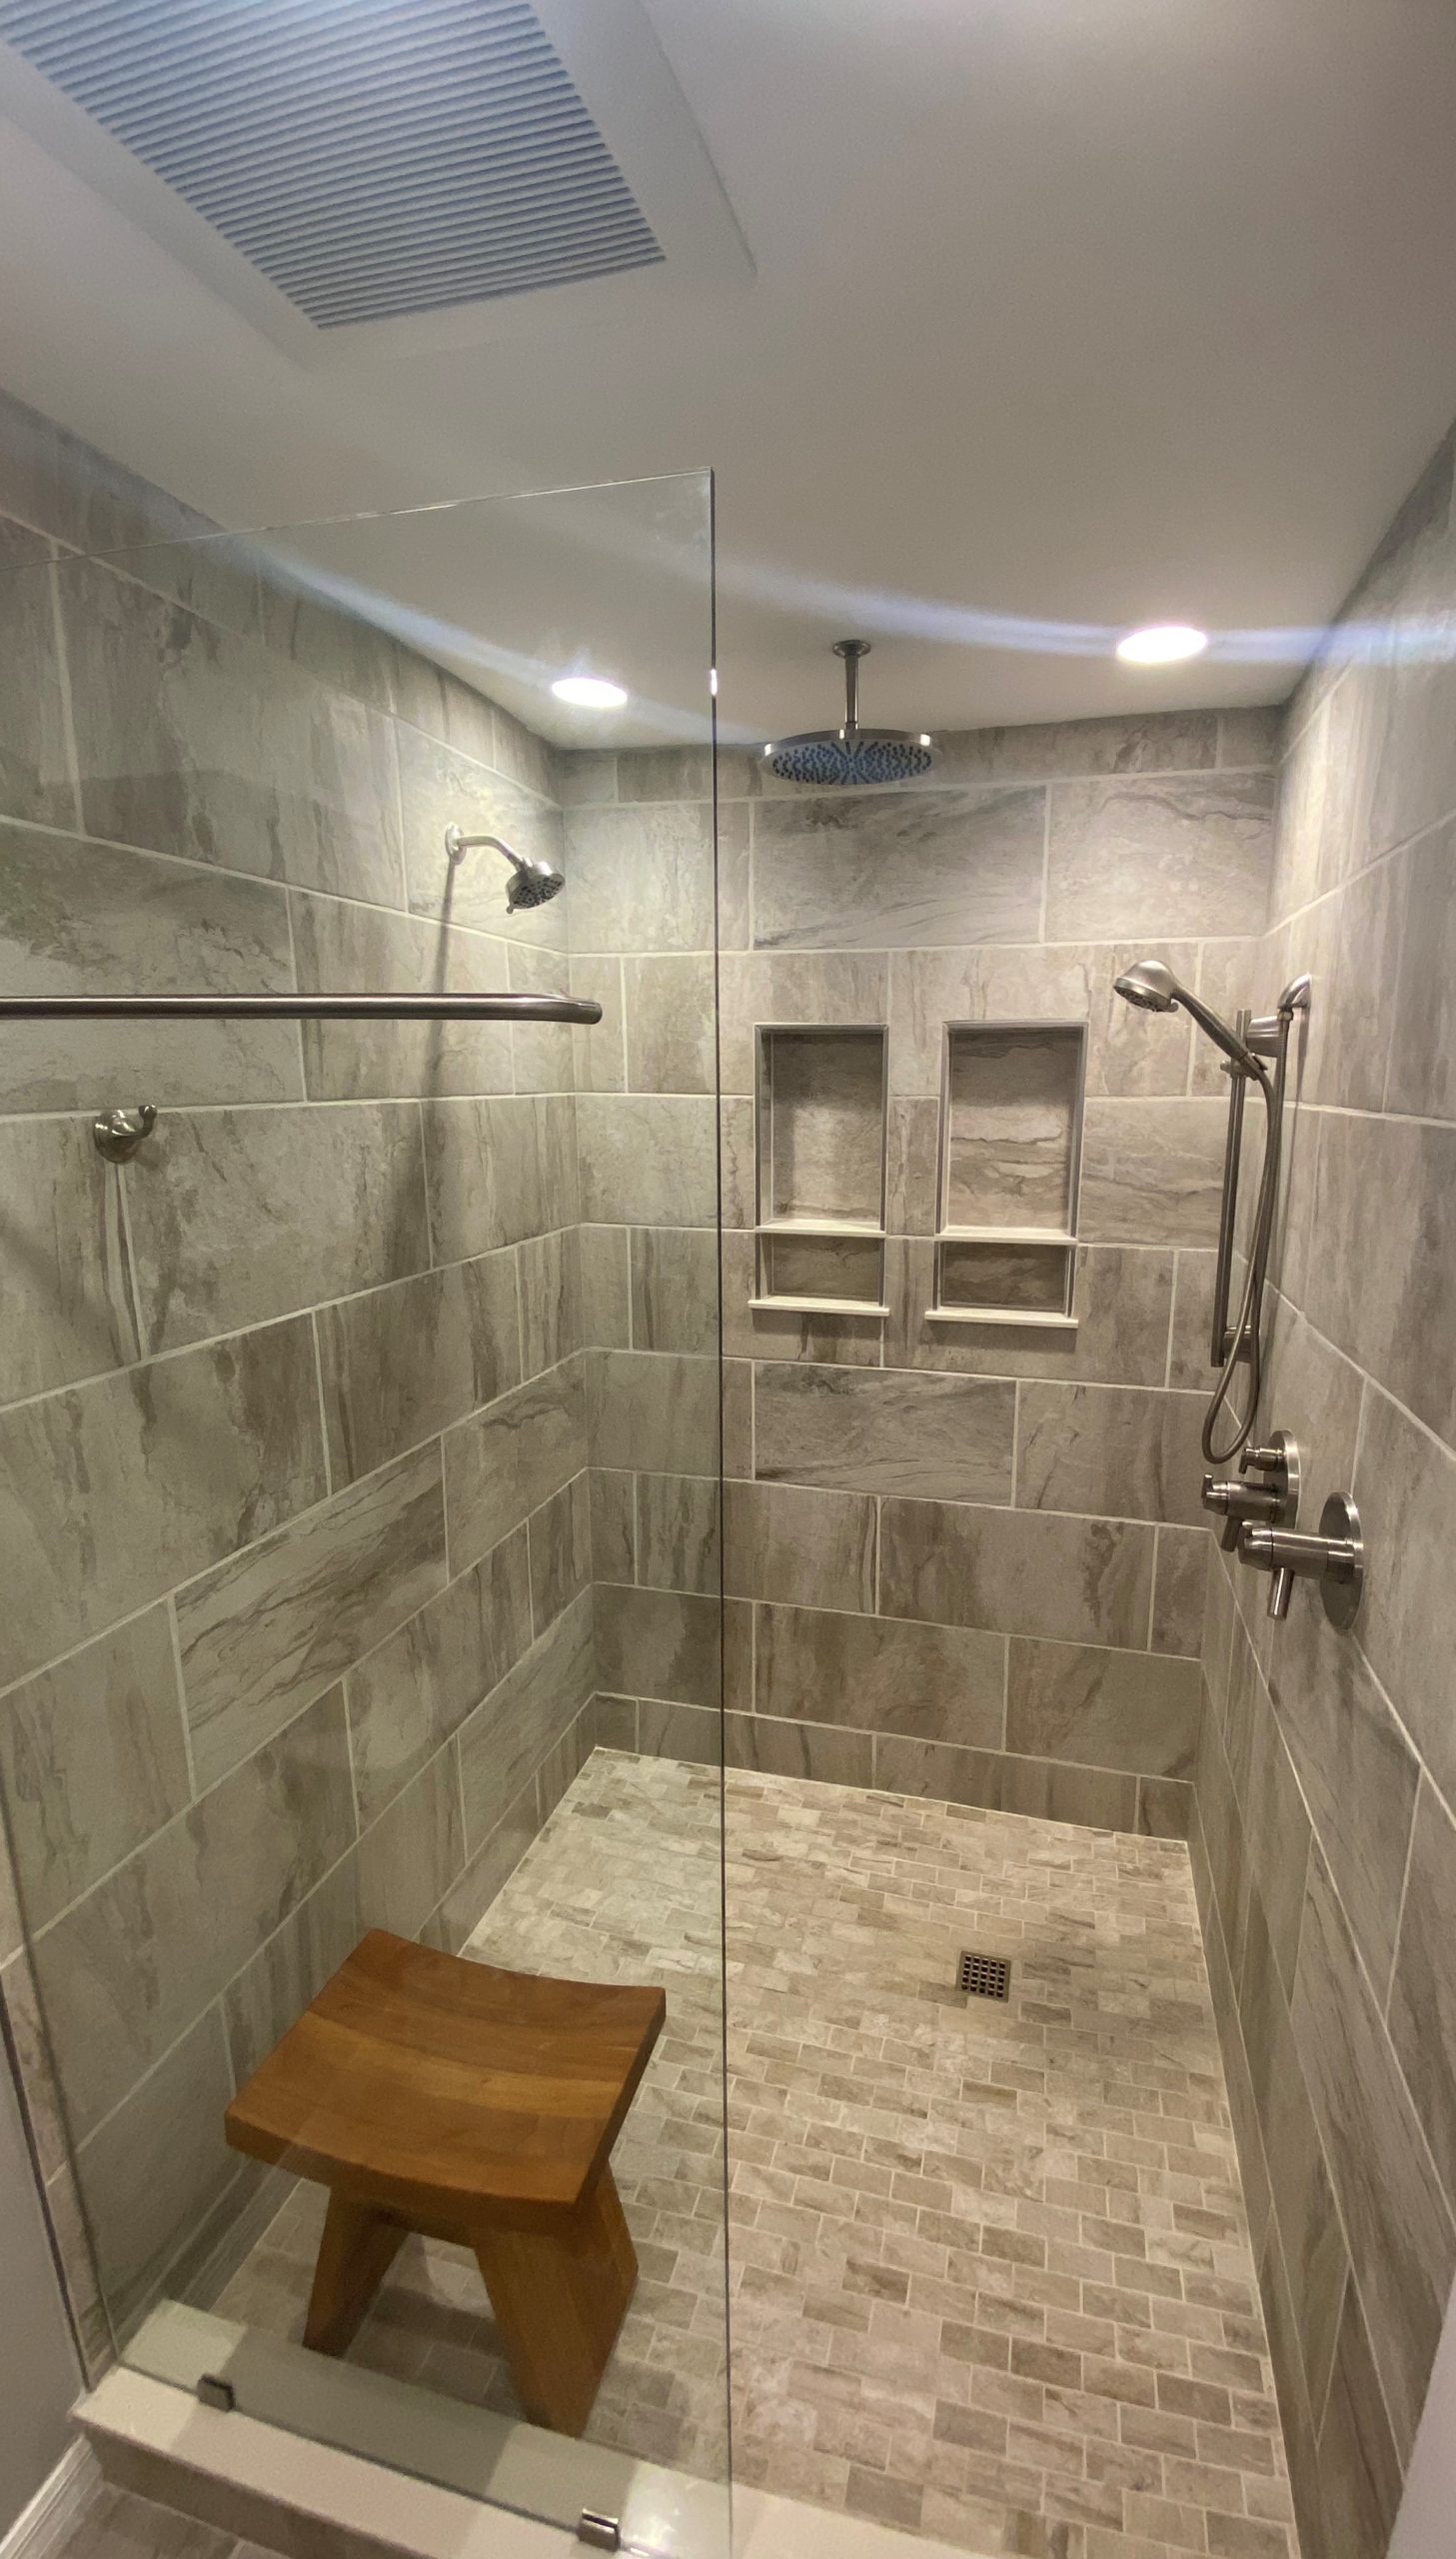 Shower Remodels - Riverview Home Remodeling Contractor - David Spence Inc.